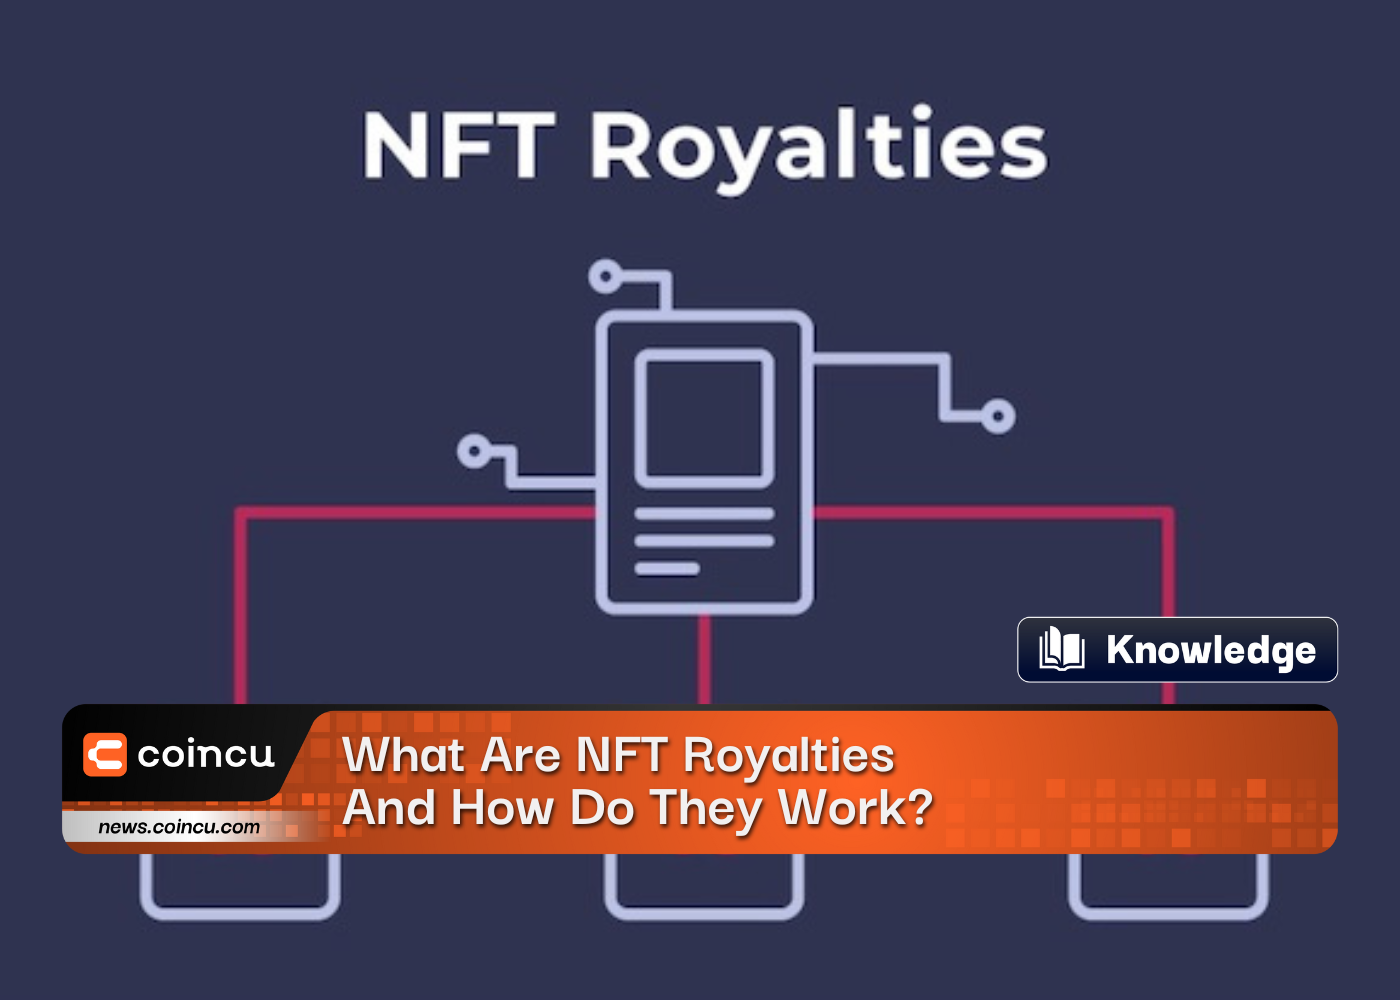 What Are NFT Royalties